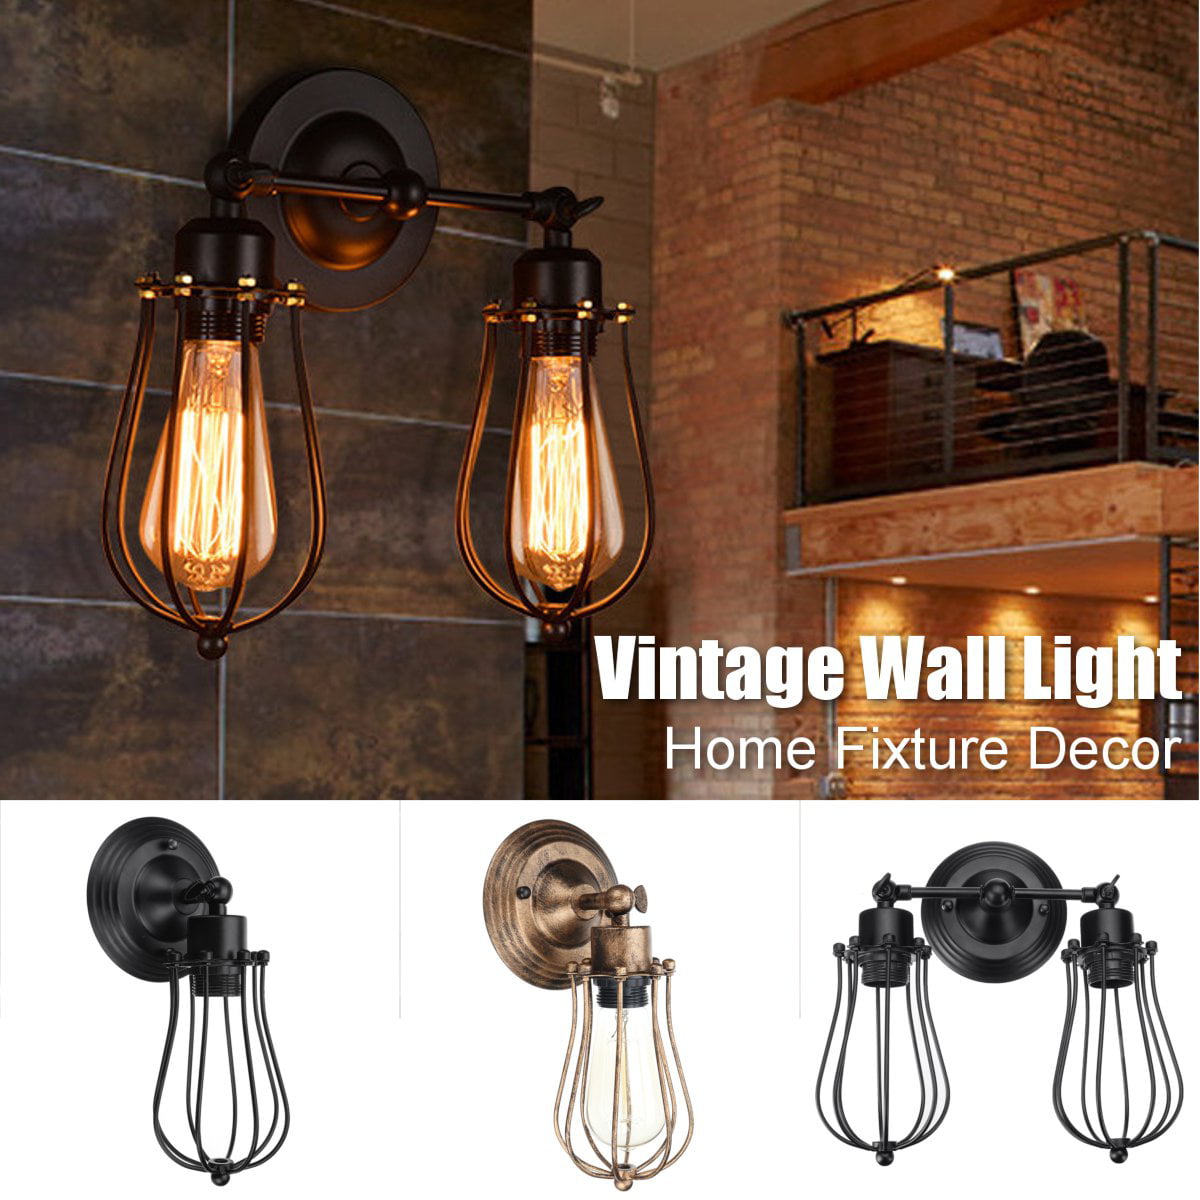 Vintage Industrial Wall Lamp Retro Wall Sconce Light Fixture Metal Home Ba 